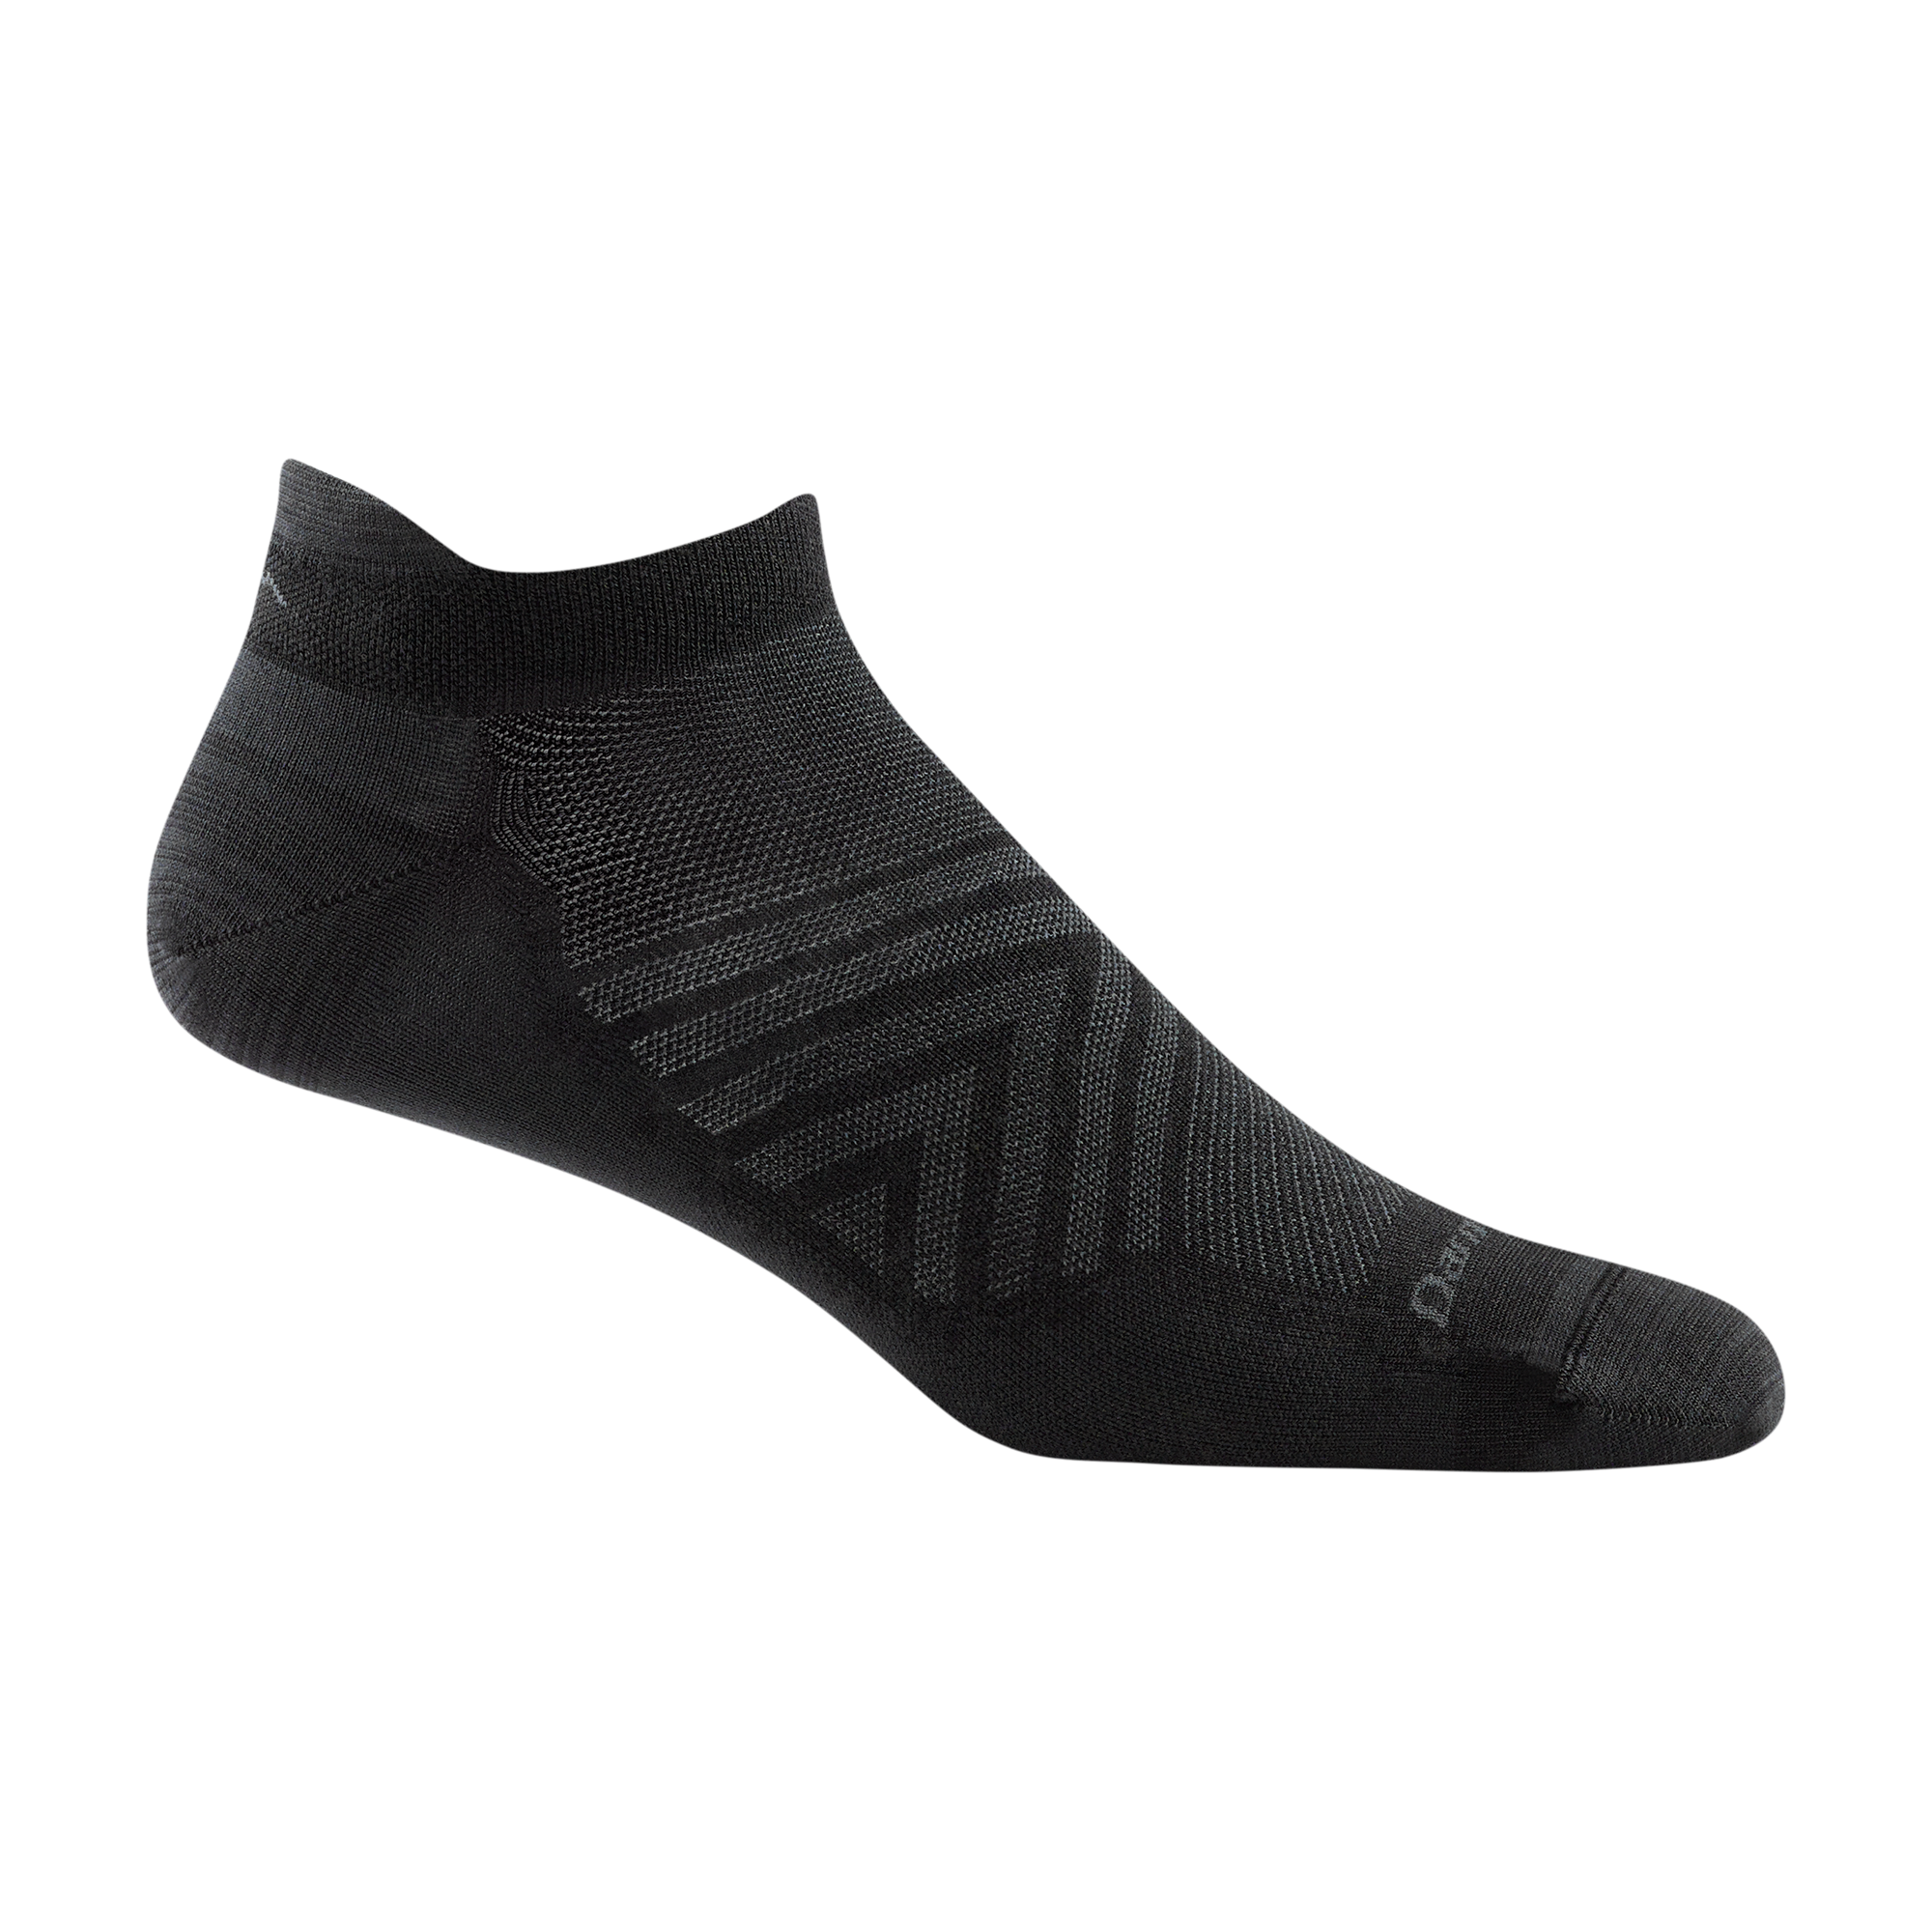 1033 men's no show tab running sock in color black with dark grey chevron and darn tough signature on forefoot